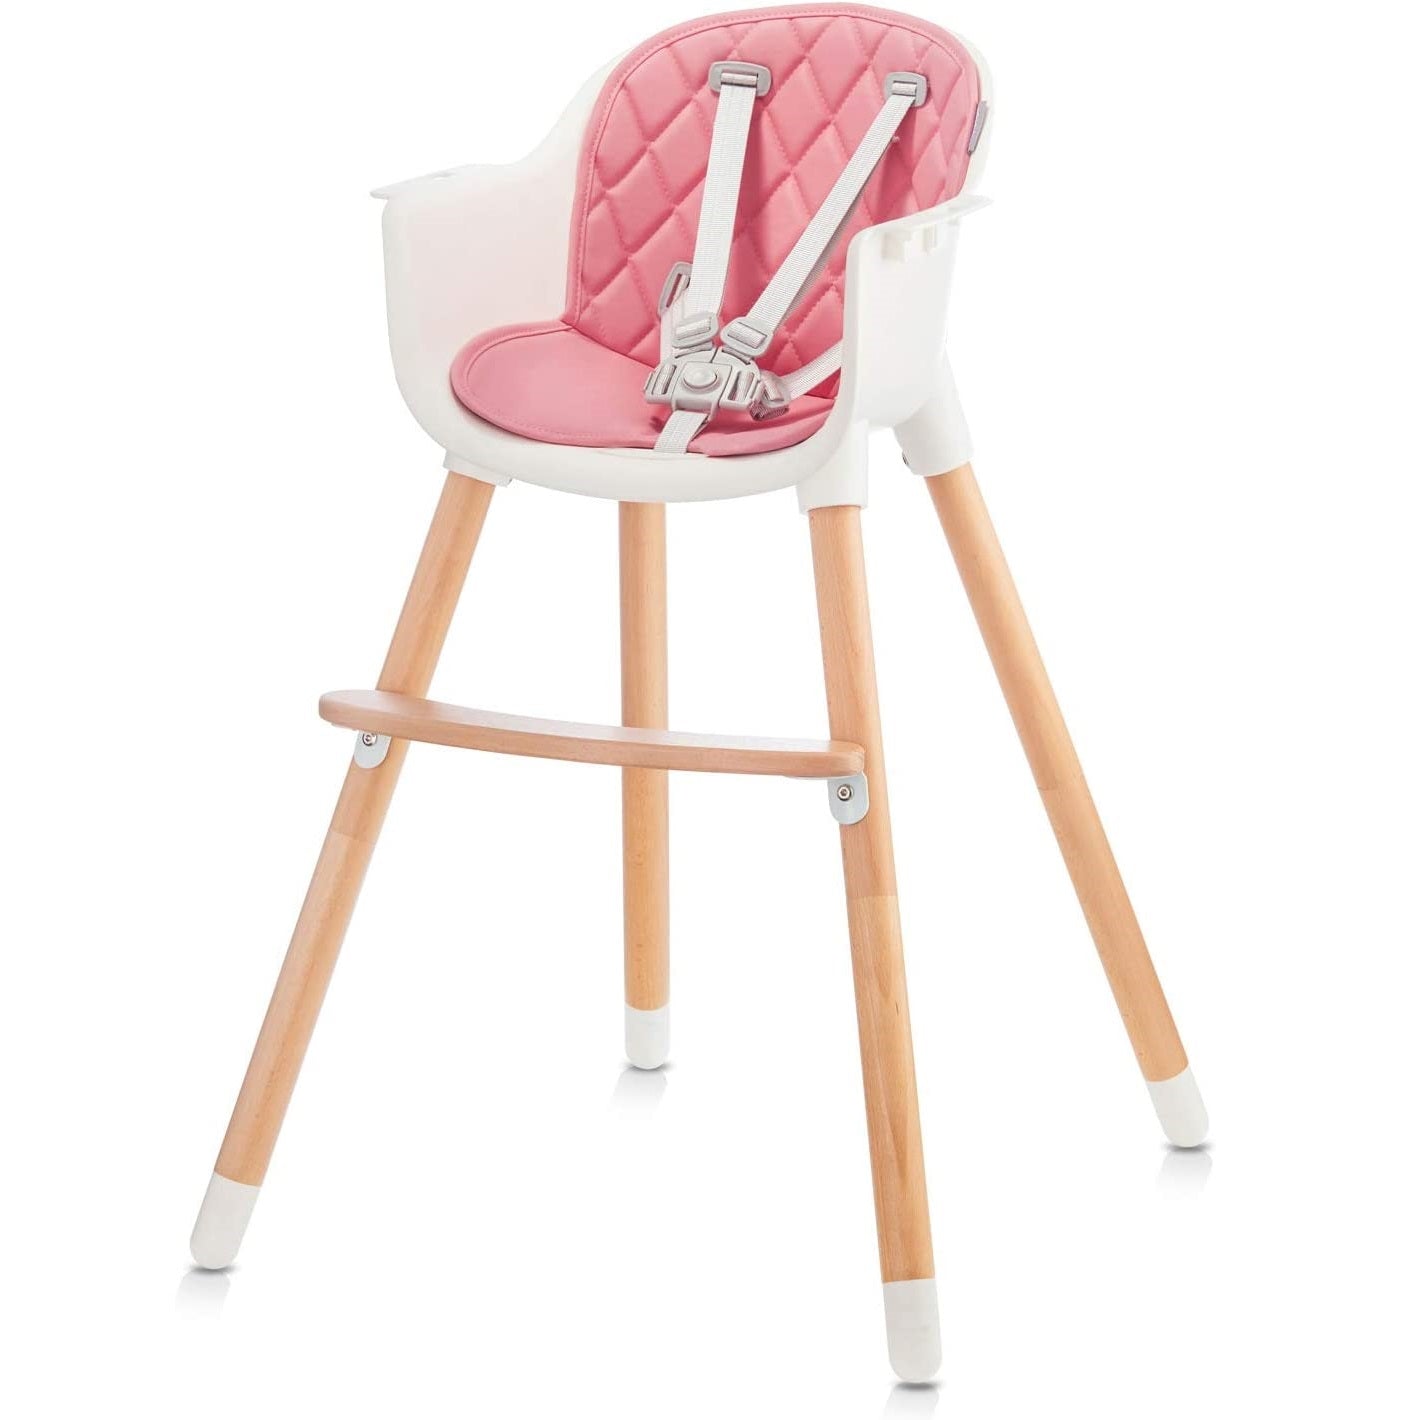 Sienna High Chair: The Only Seat Your Child Needs